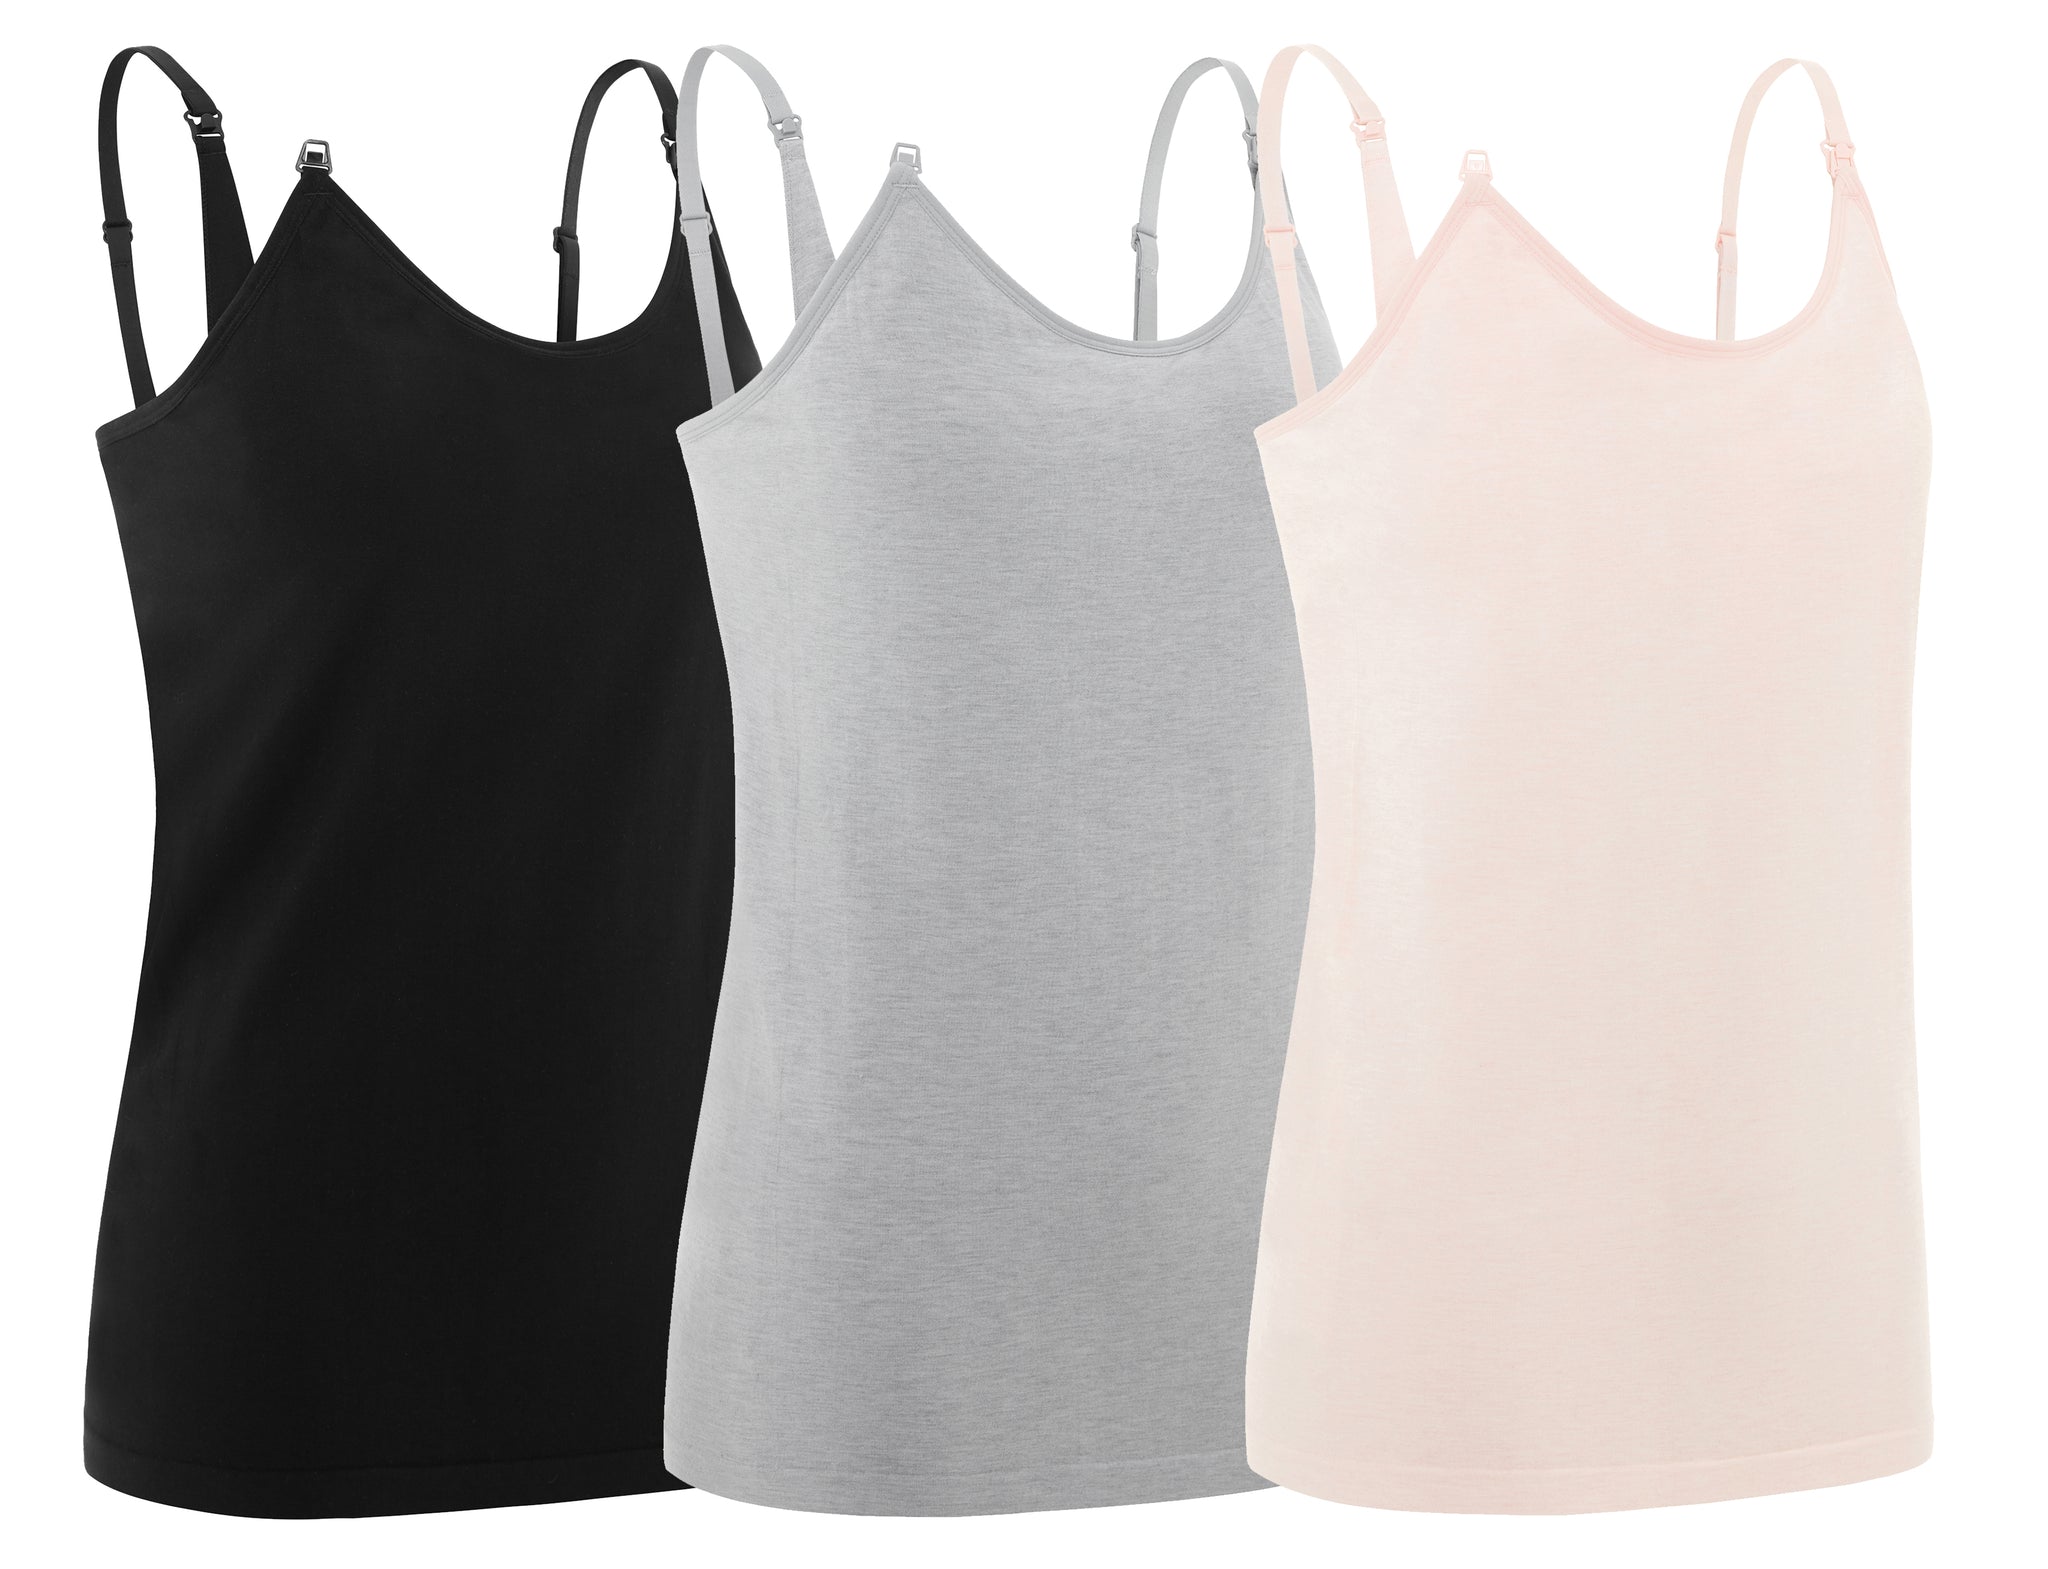 Under Control Maternity Camisole 3 Pack (Black/Grey/Pink)